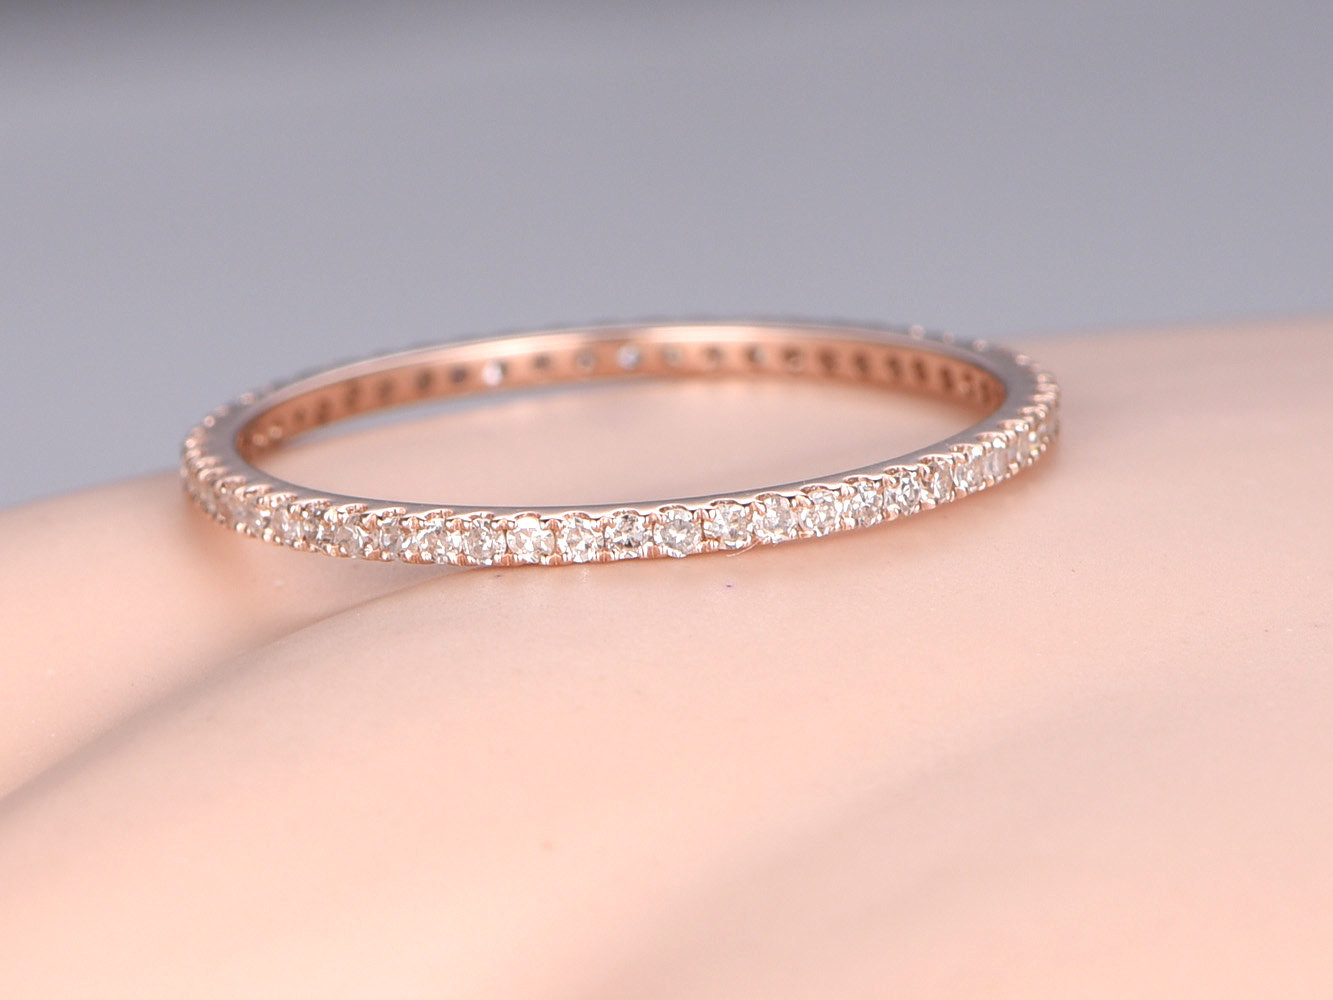 Pave Wedding Band
 Petite French micro pave Diamond wedding band solid by